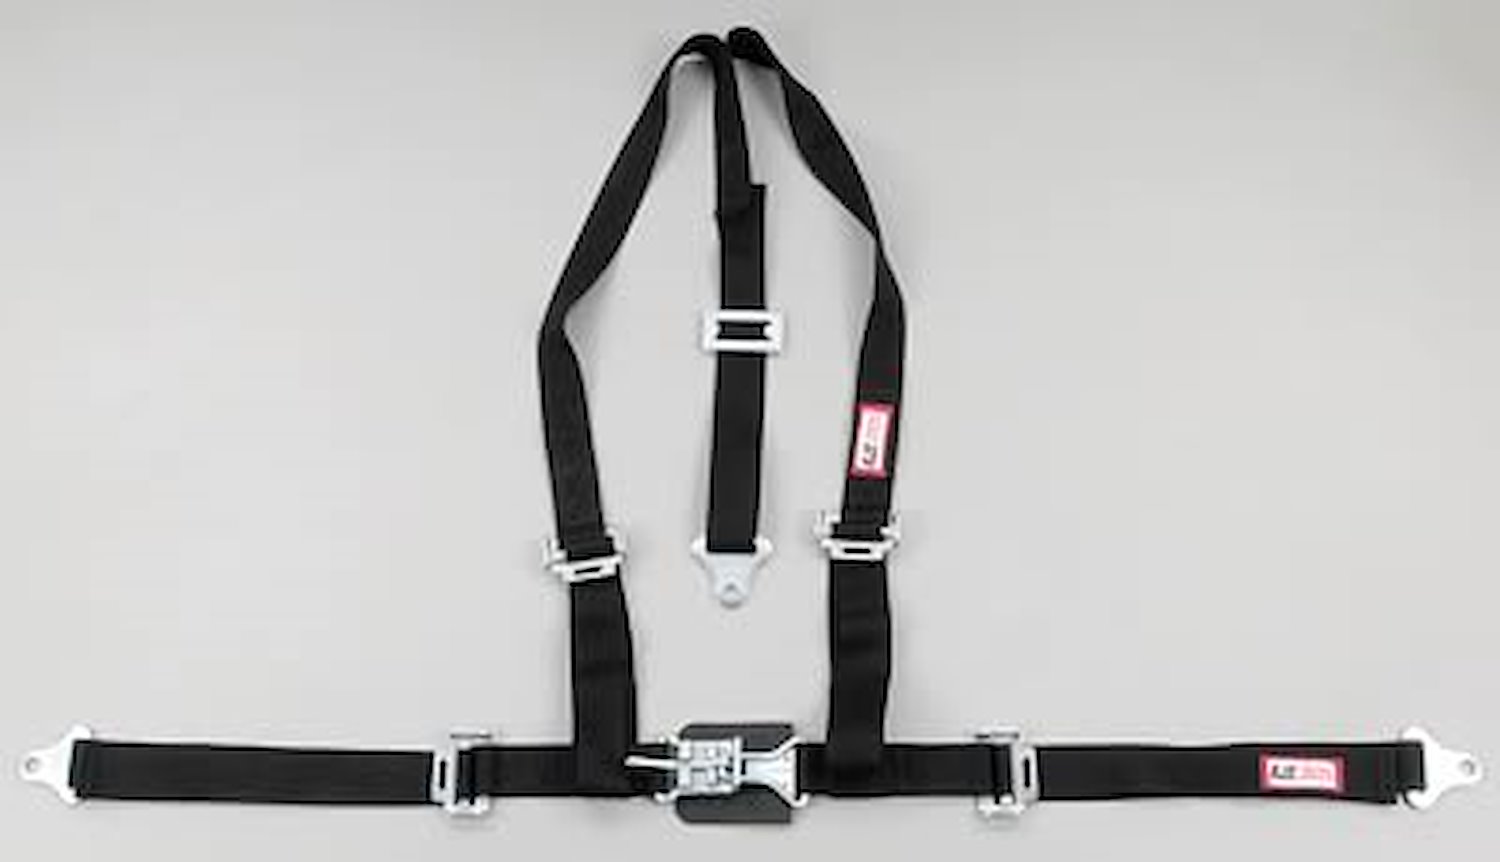 NON-SFI L&L HARNESS 2 PULL UP Lap Belt BOLT SEWN IN 2 S.H. Y FLOOR Mount w/STERNUM STRAP WRAP/BOLT YELLOW